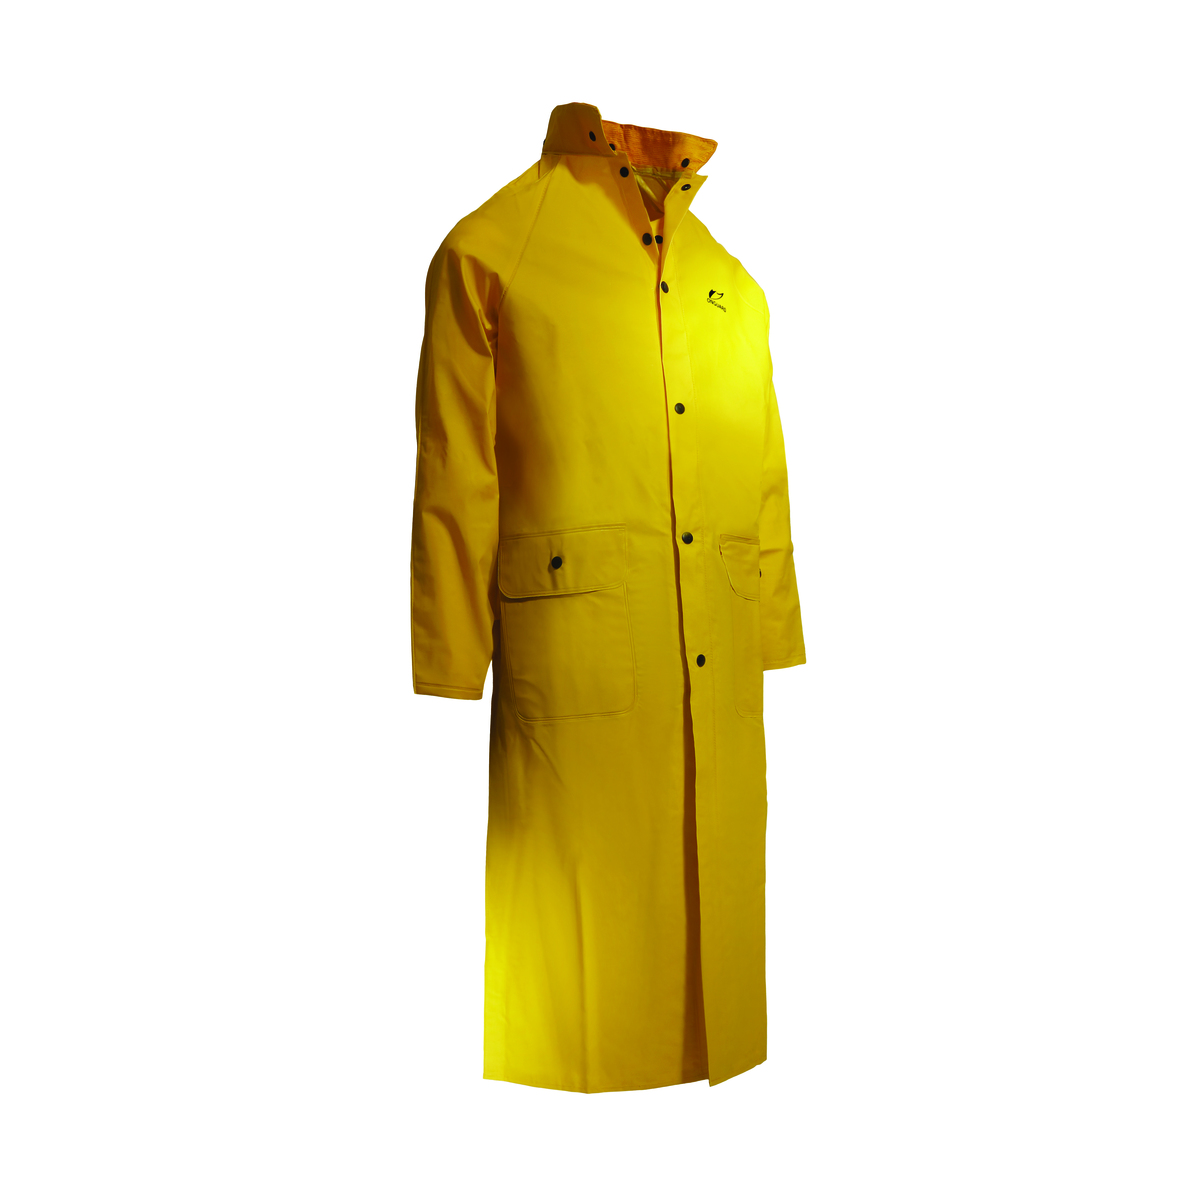 Dunlop® Protective Footwear 4X Yellow Sitex Polyester/PVC Rain Jacket With Detachable Hood